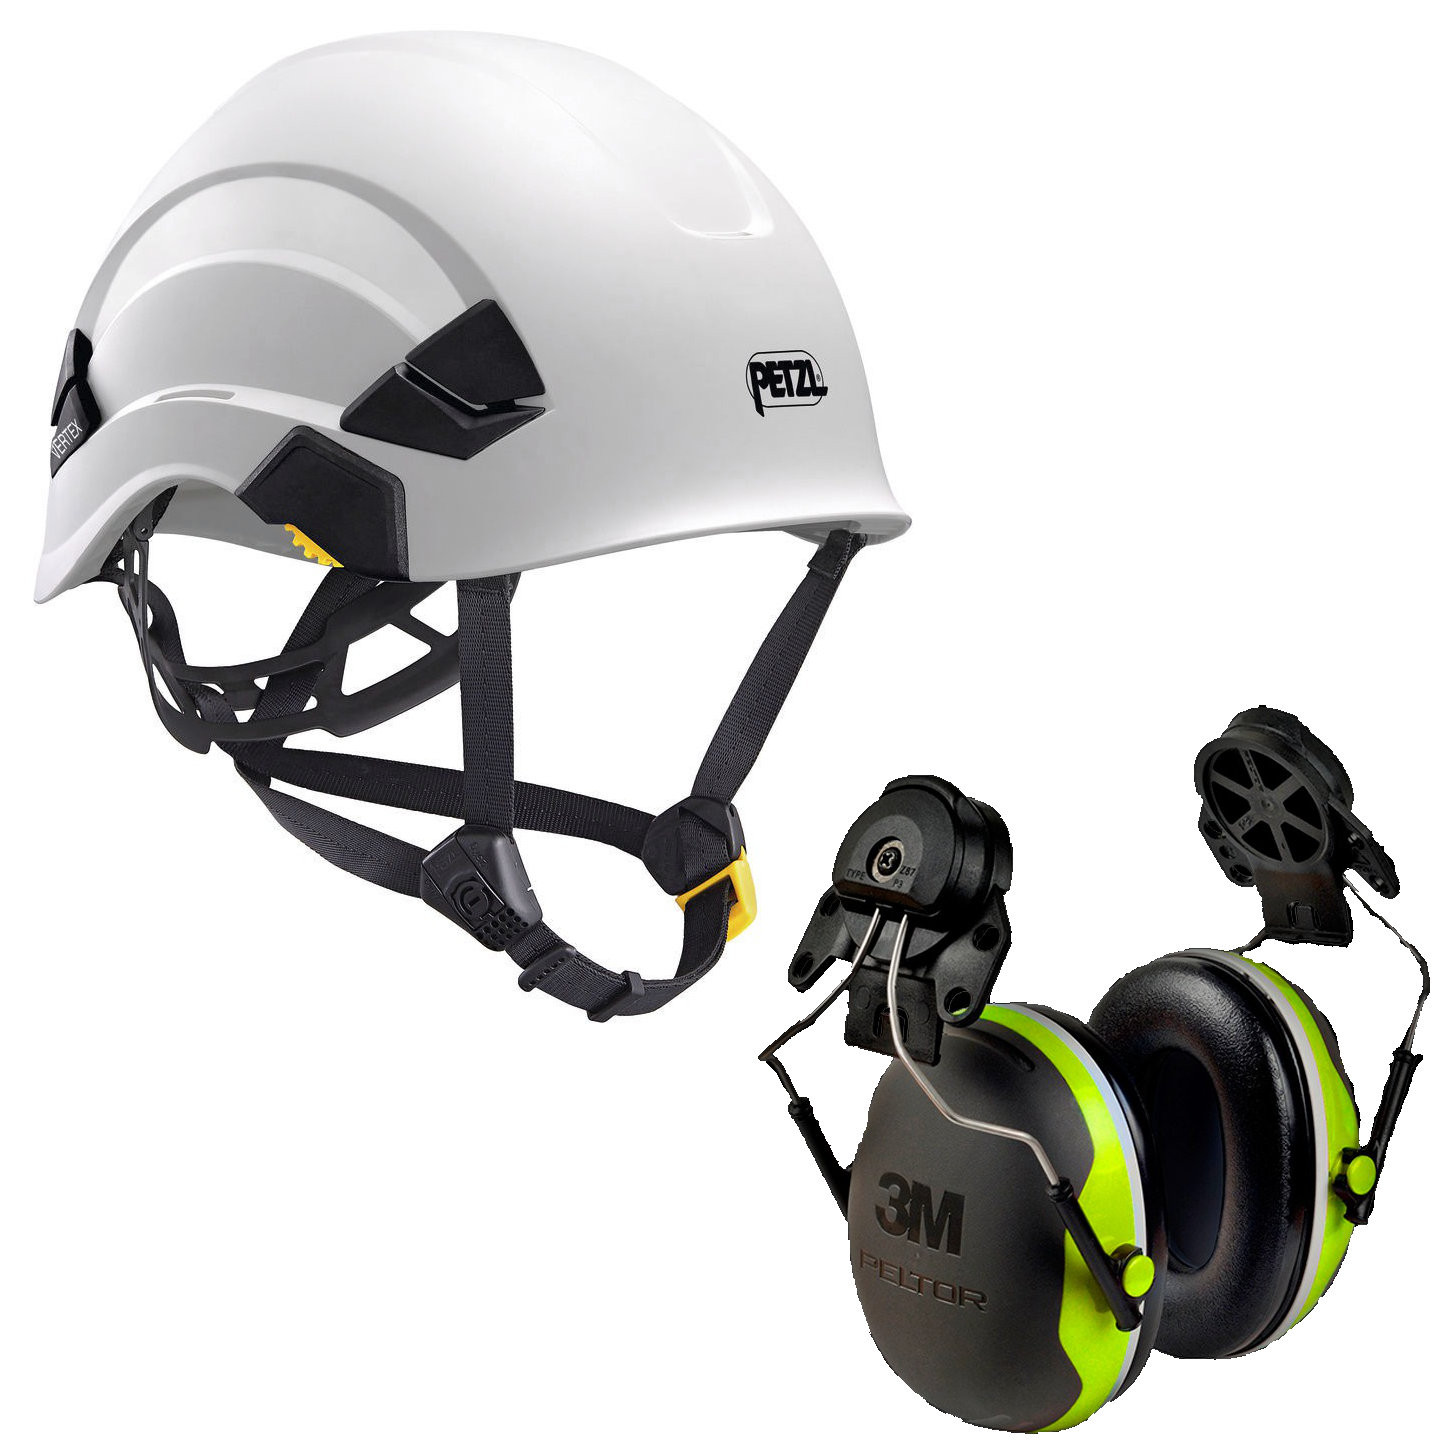 Purchase Petzl VERTEX WHITE Helmet (A010AA00)  3M Earmffs X4P3G/E AS/NZ  1801 Compliant online today. Best PPE and safety products in Australia.